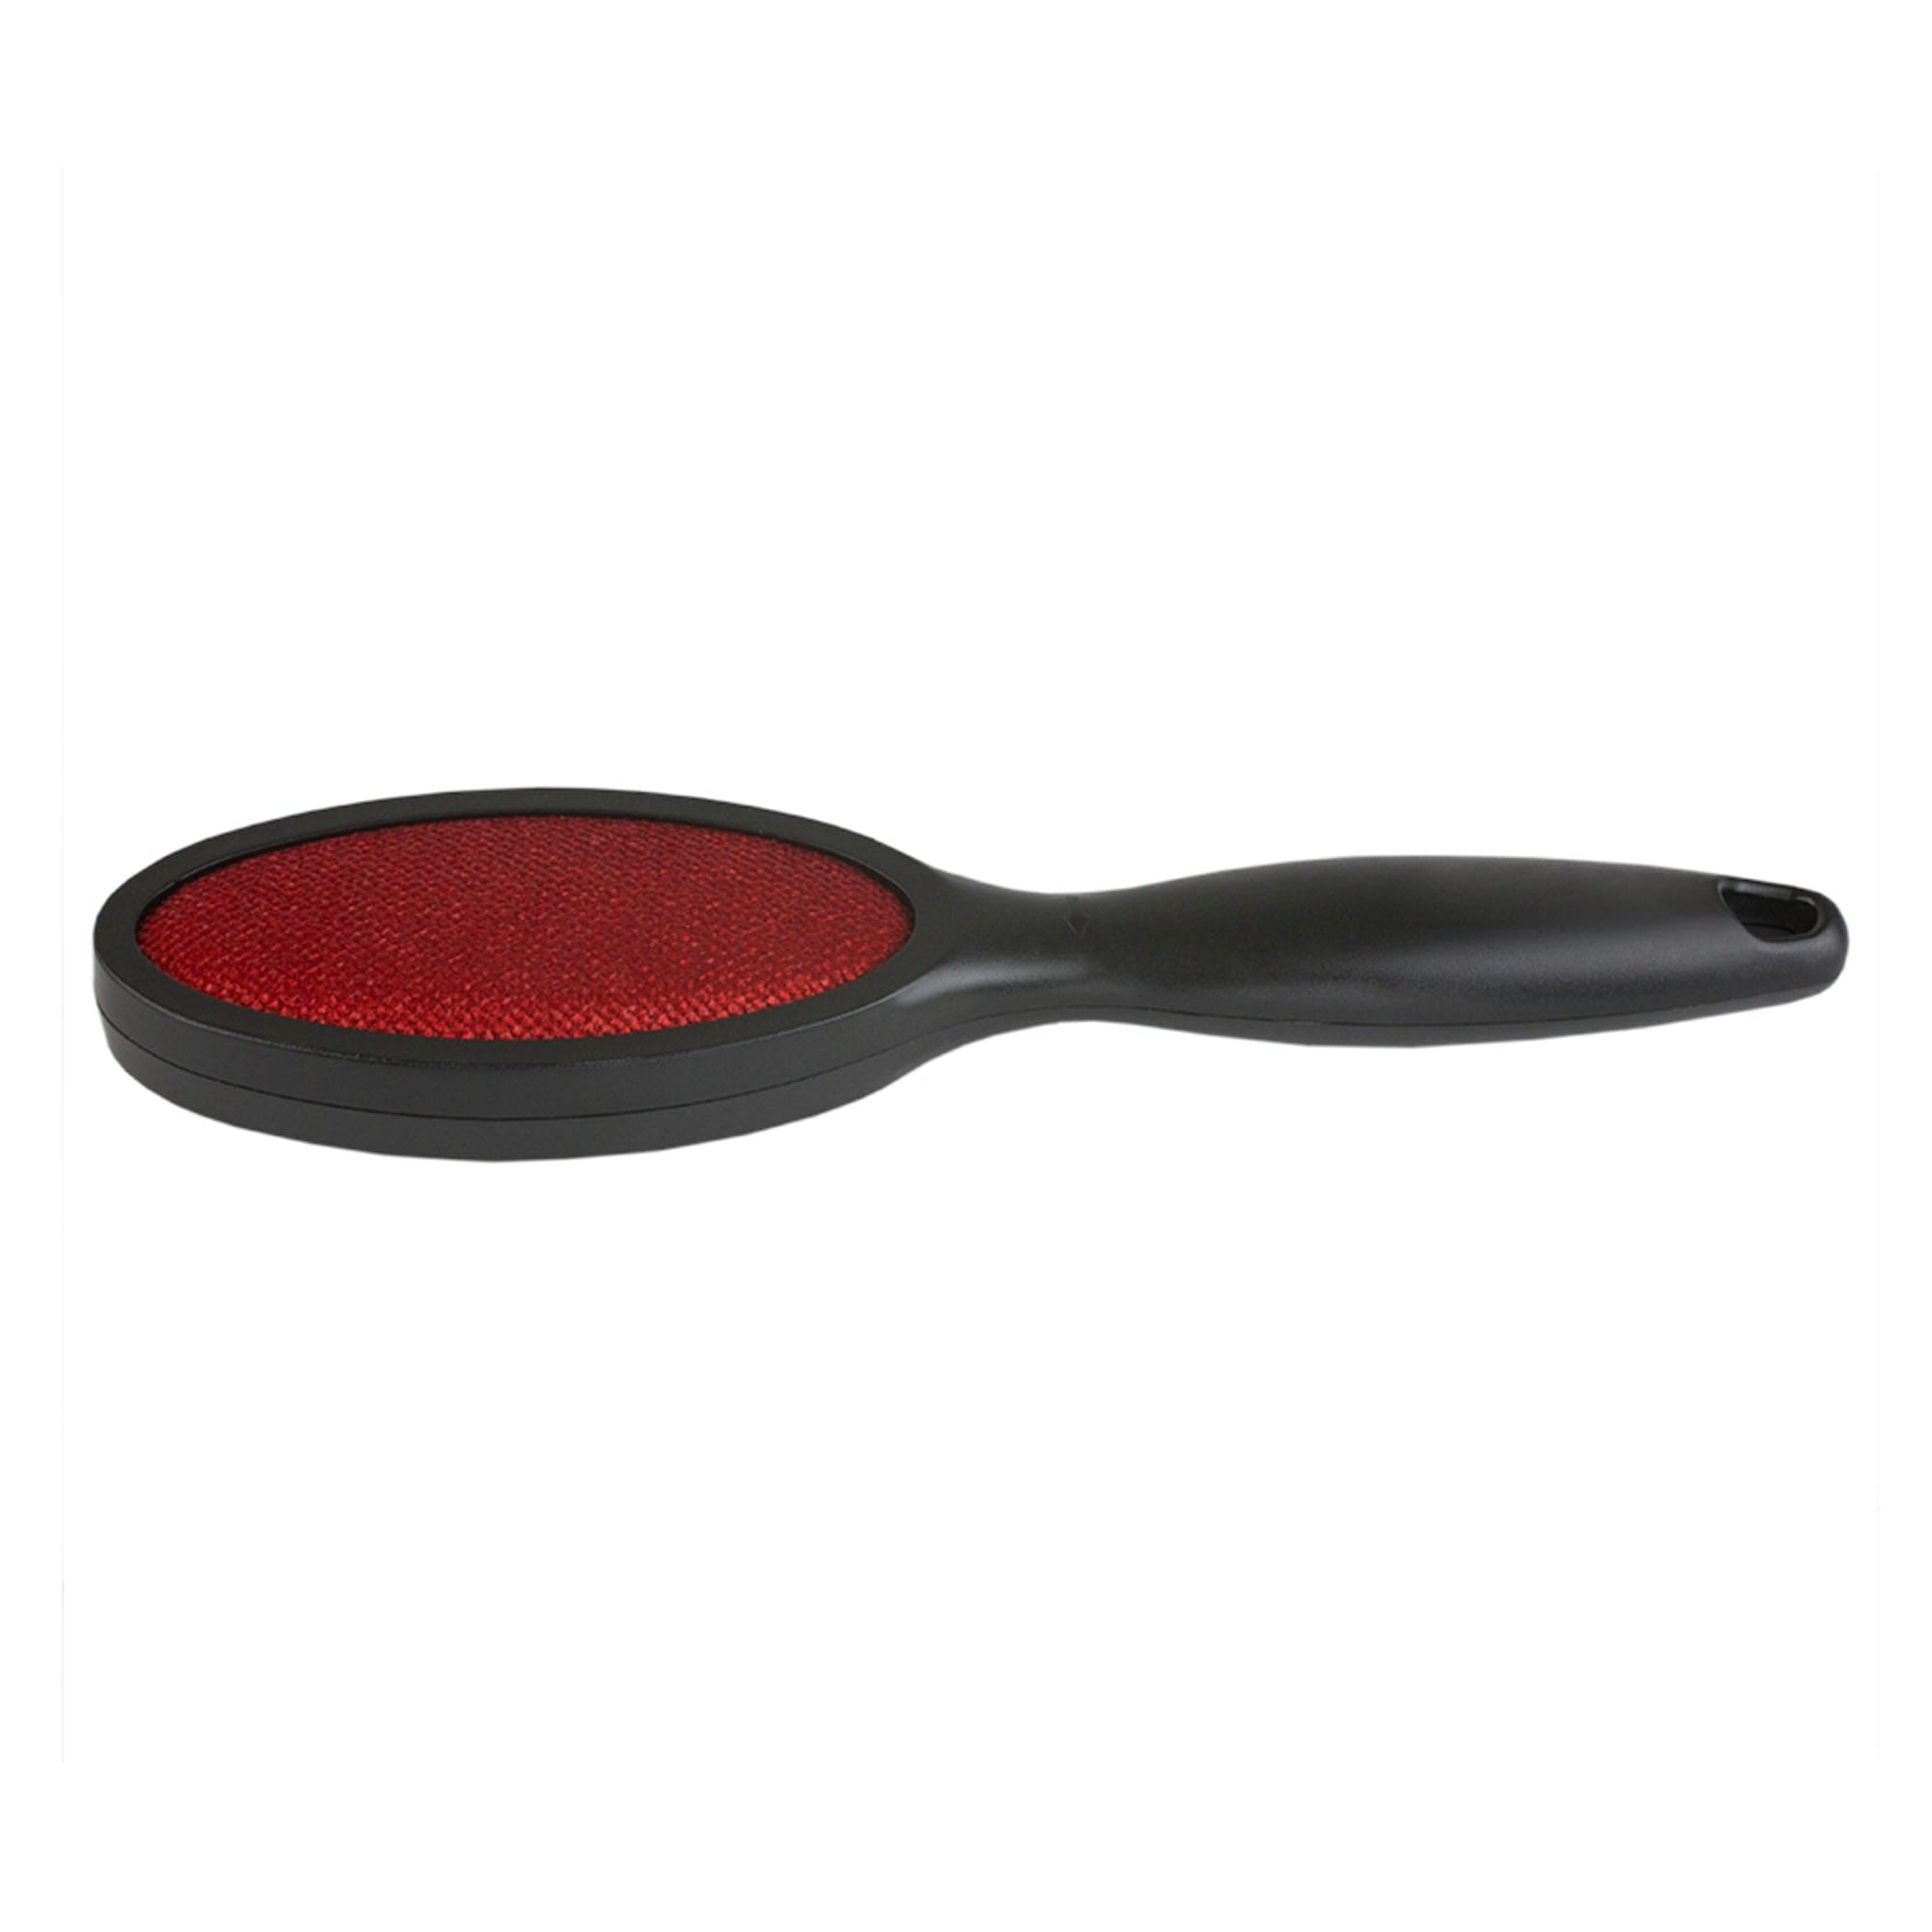 Home Basics Double Sided Lint Remover, Red/Black $2.00 EACH, CASE PACK OF 24